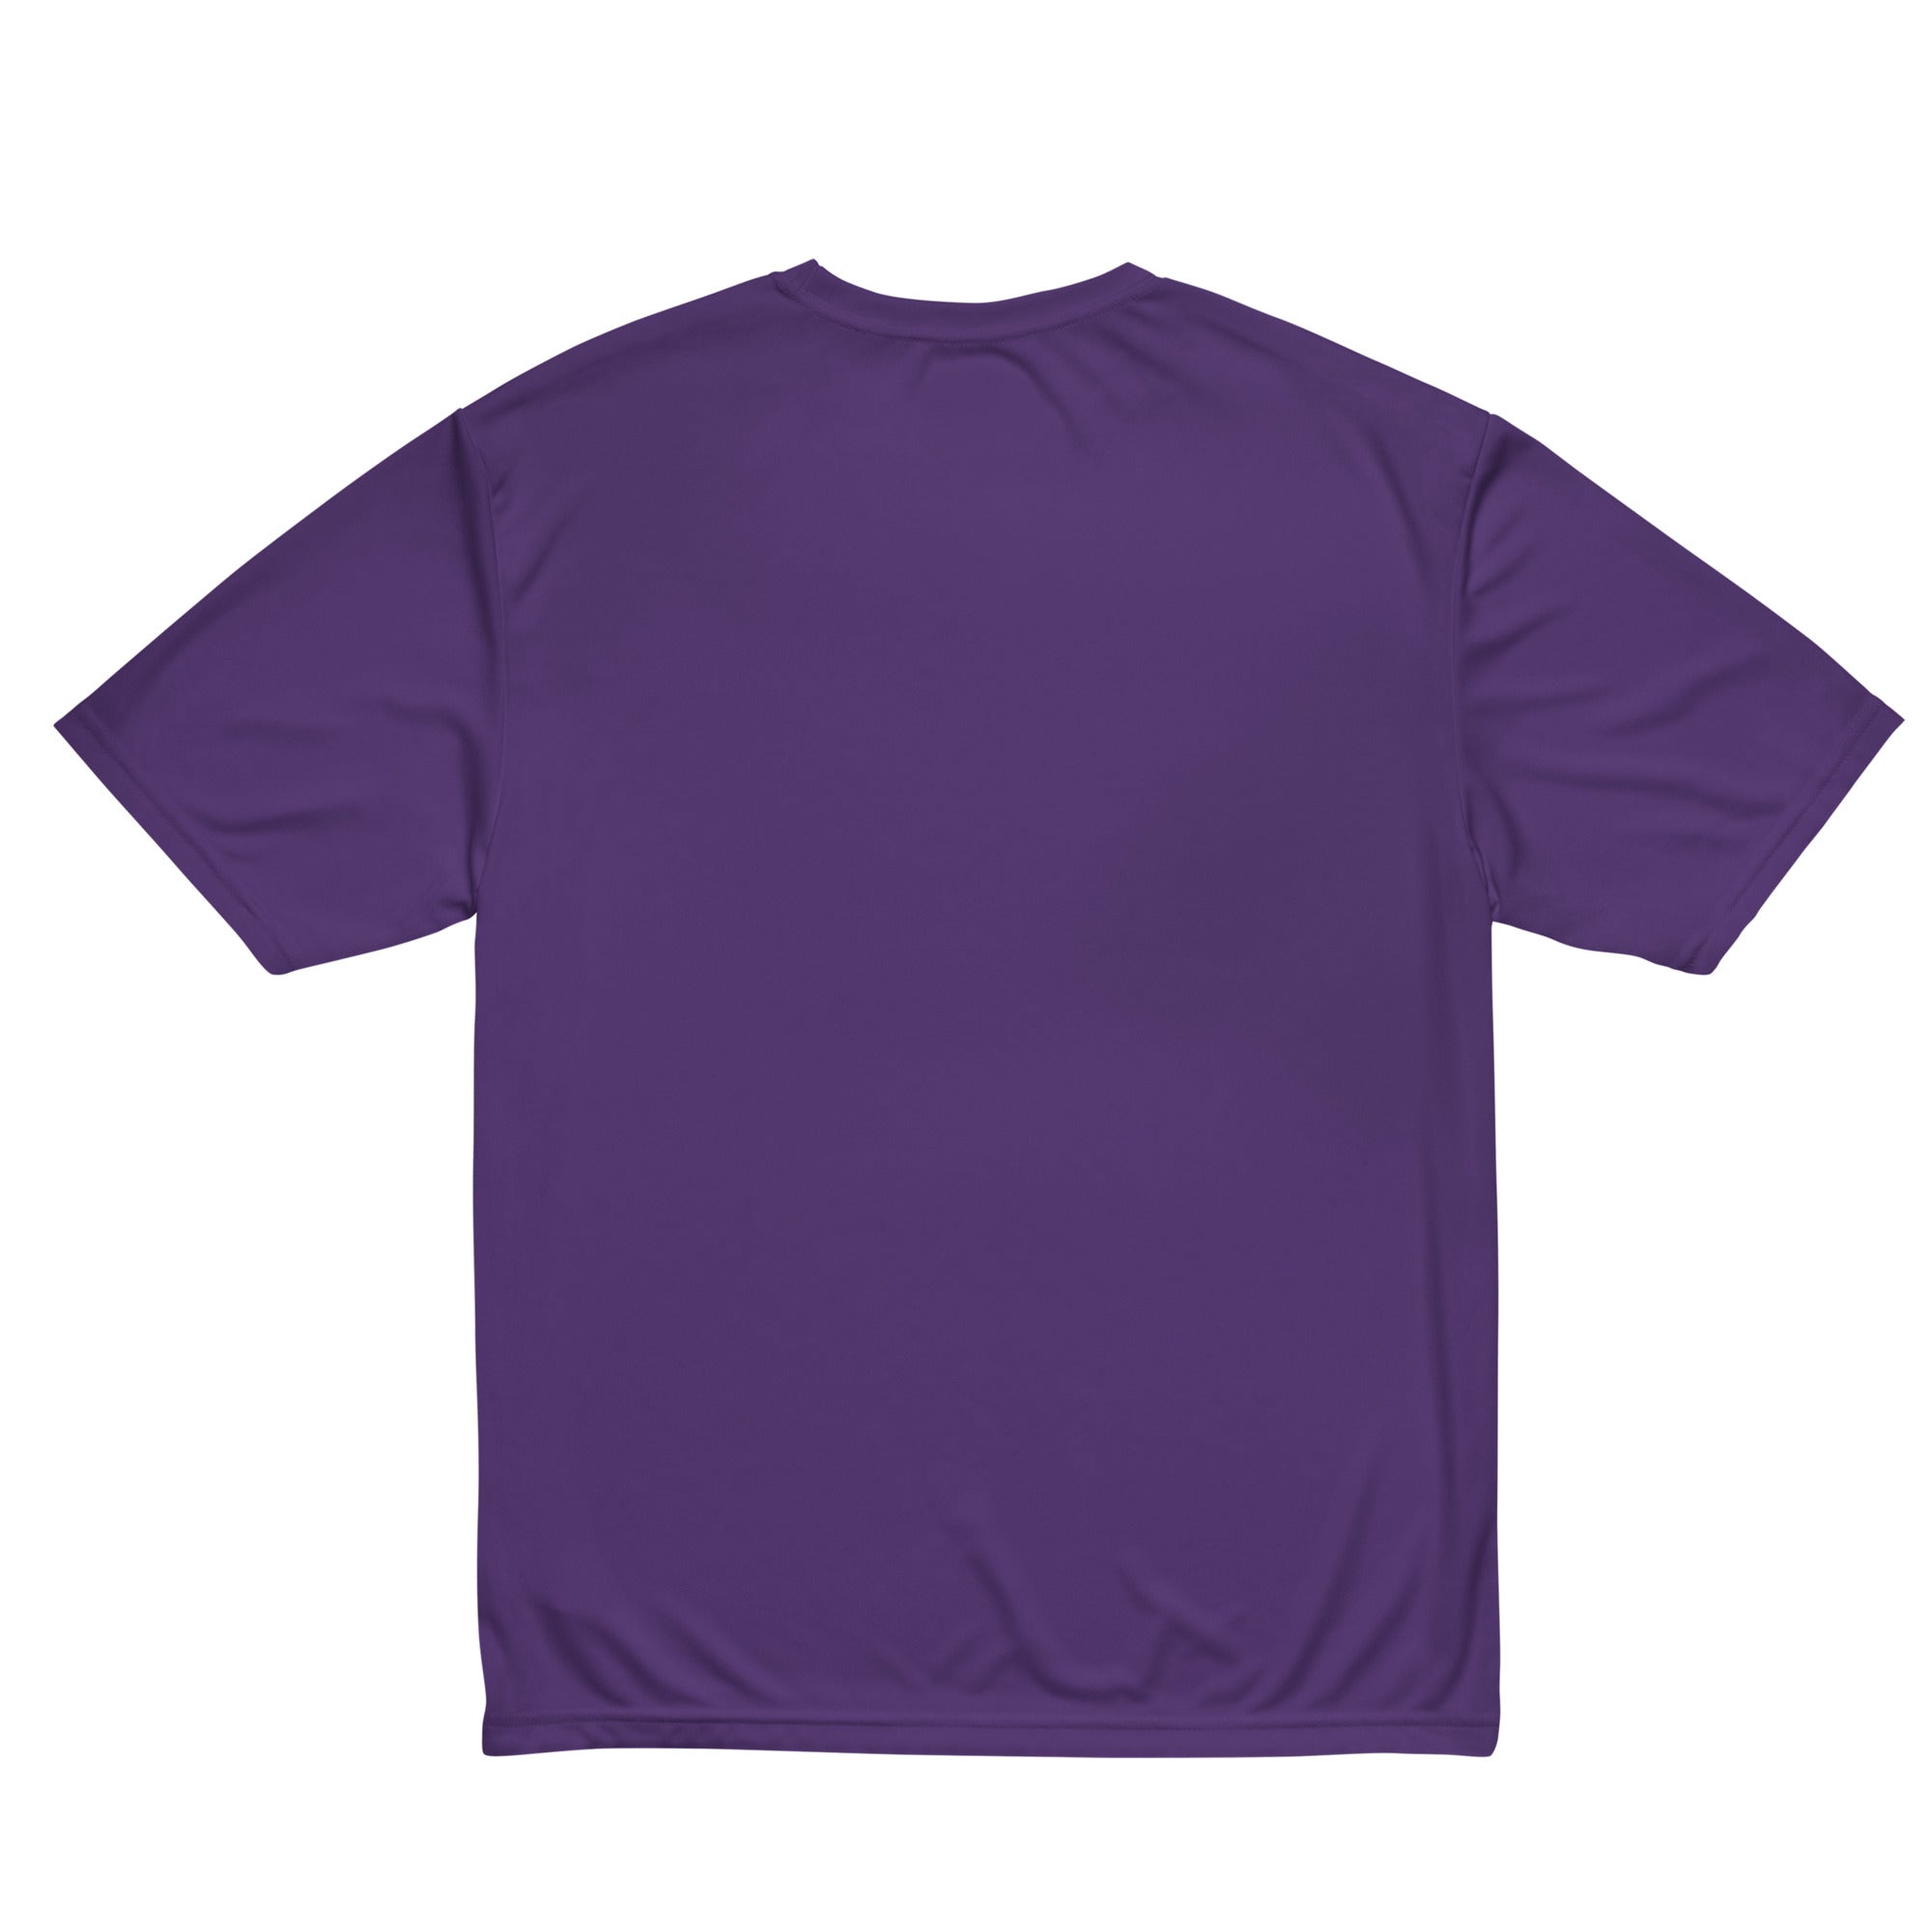 Resolute Tee - Moisture Wicking - For the Fighting Trim Bruhs - Licensed